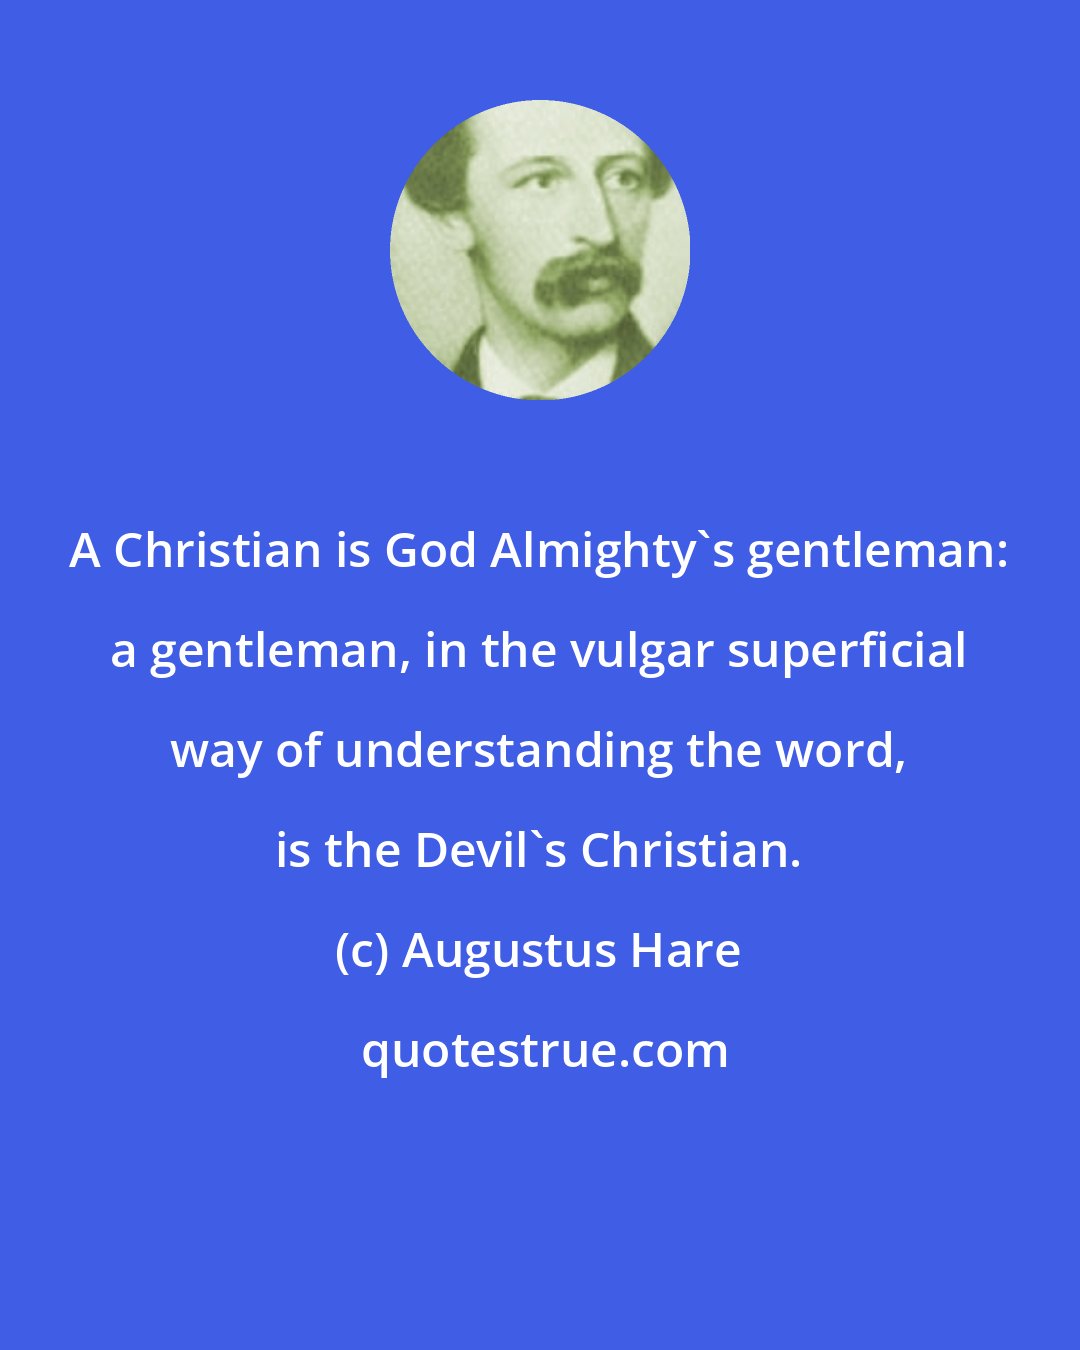 Augustus Hare: A Christian is God Almighty's gentleman: a gentleman, in the vulgar superficial way of understanding the word, is the Devil's Christian.